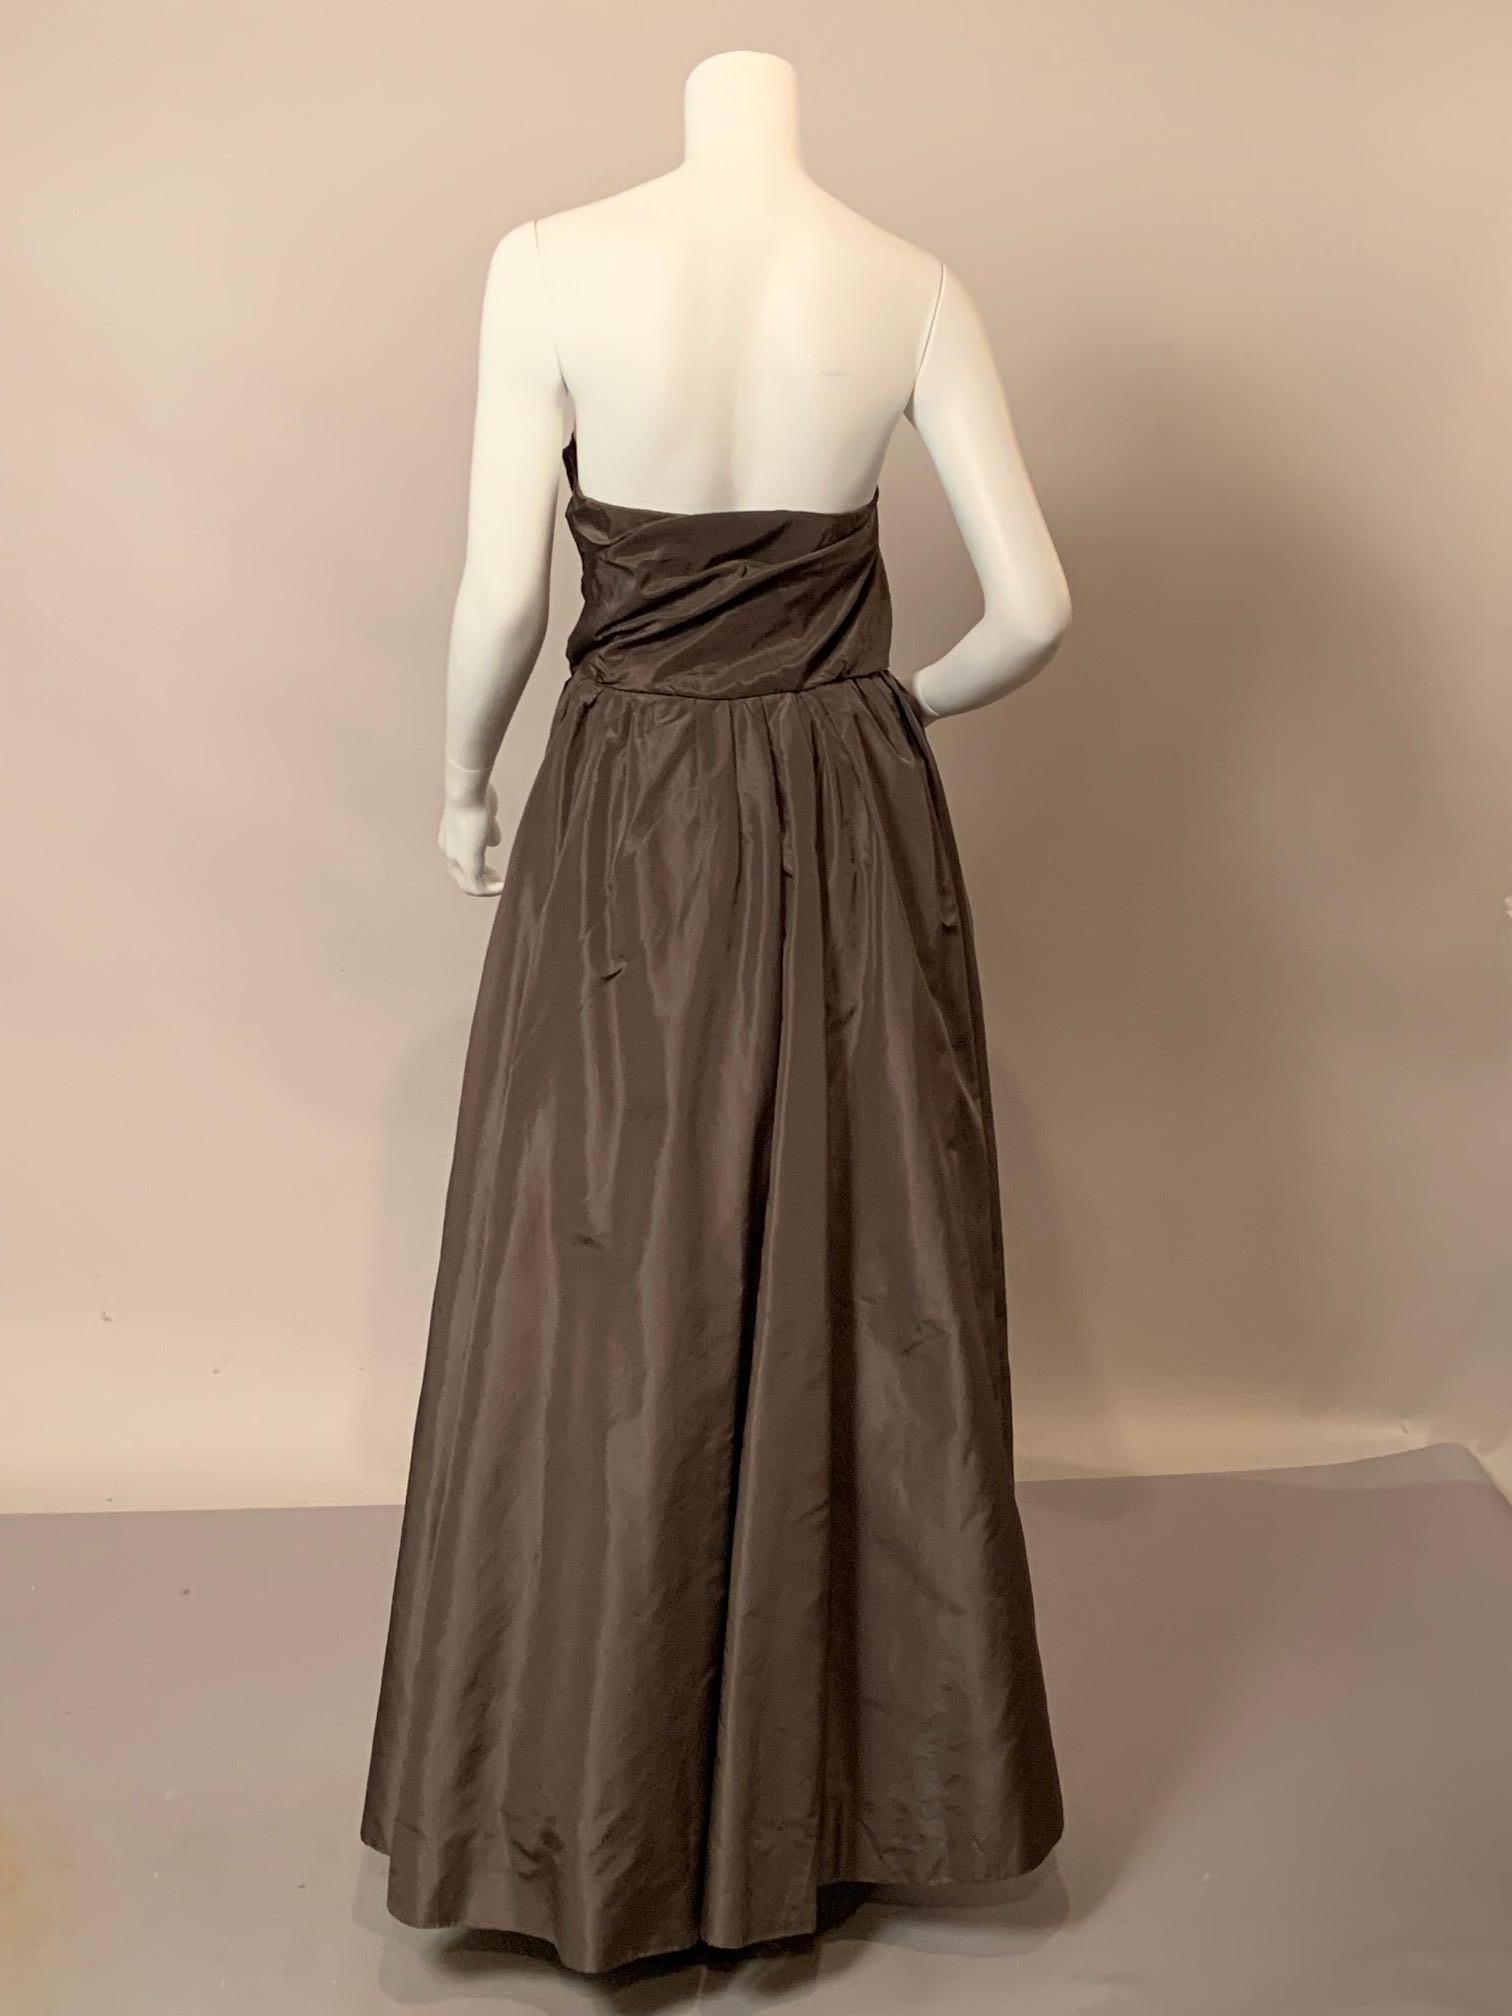 Sybil Connolly Haute Couture Charcoal Grey Strapless Ballgown For Sale 2